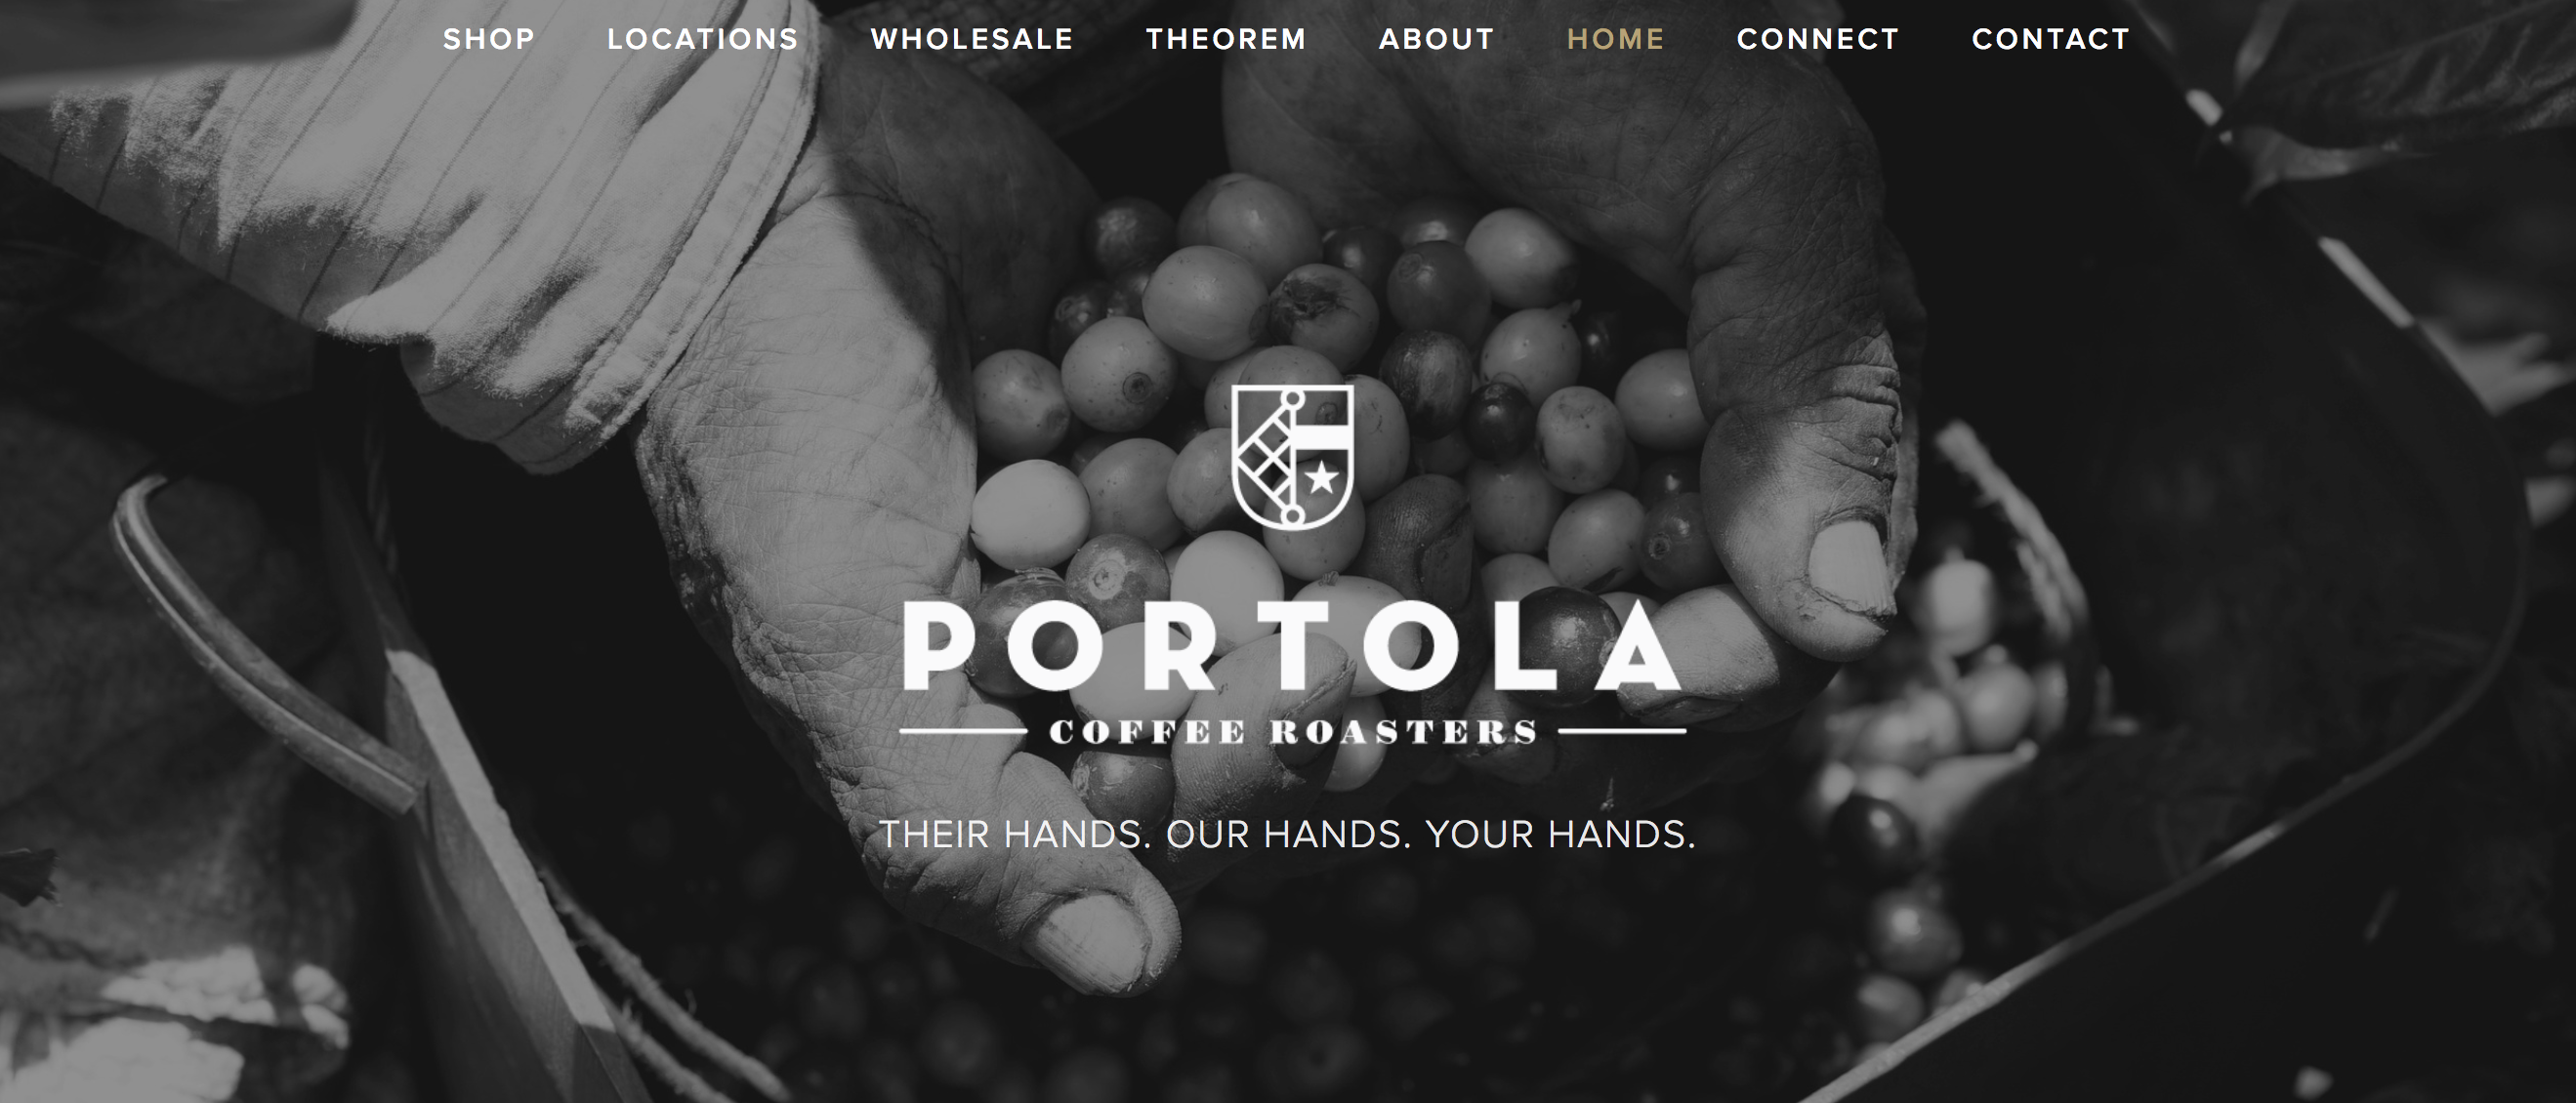 The Good Marketing Company worked with Portola Coffee Roasters